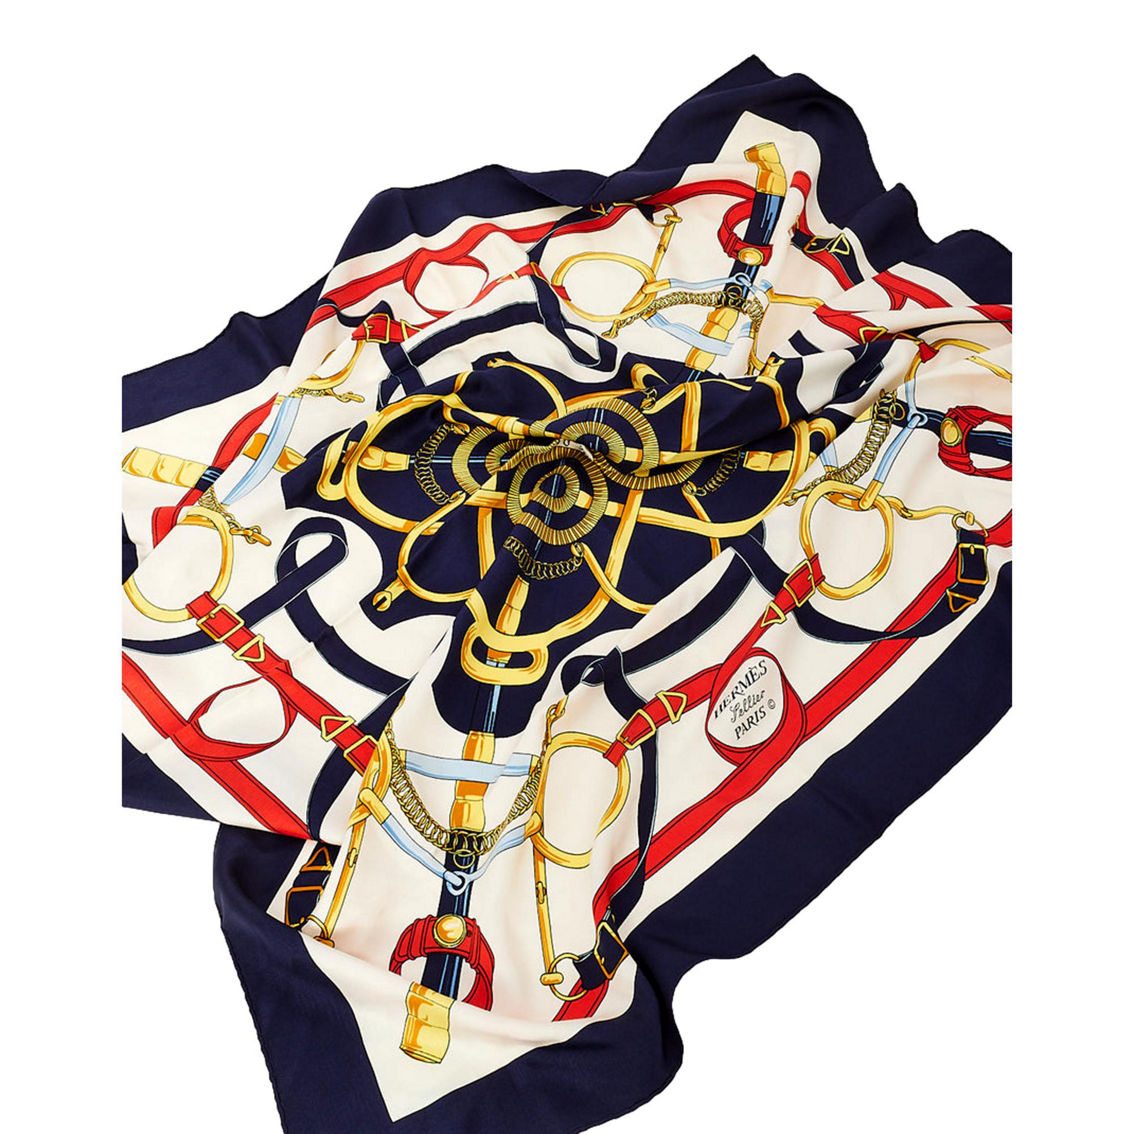 Hermes Eperon Dor Tellier Printed Silk Shawl Scarf (New) - Image 2 of 5